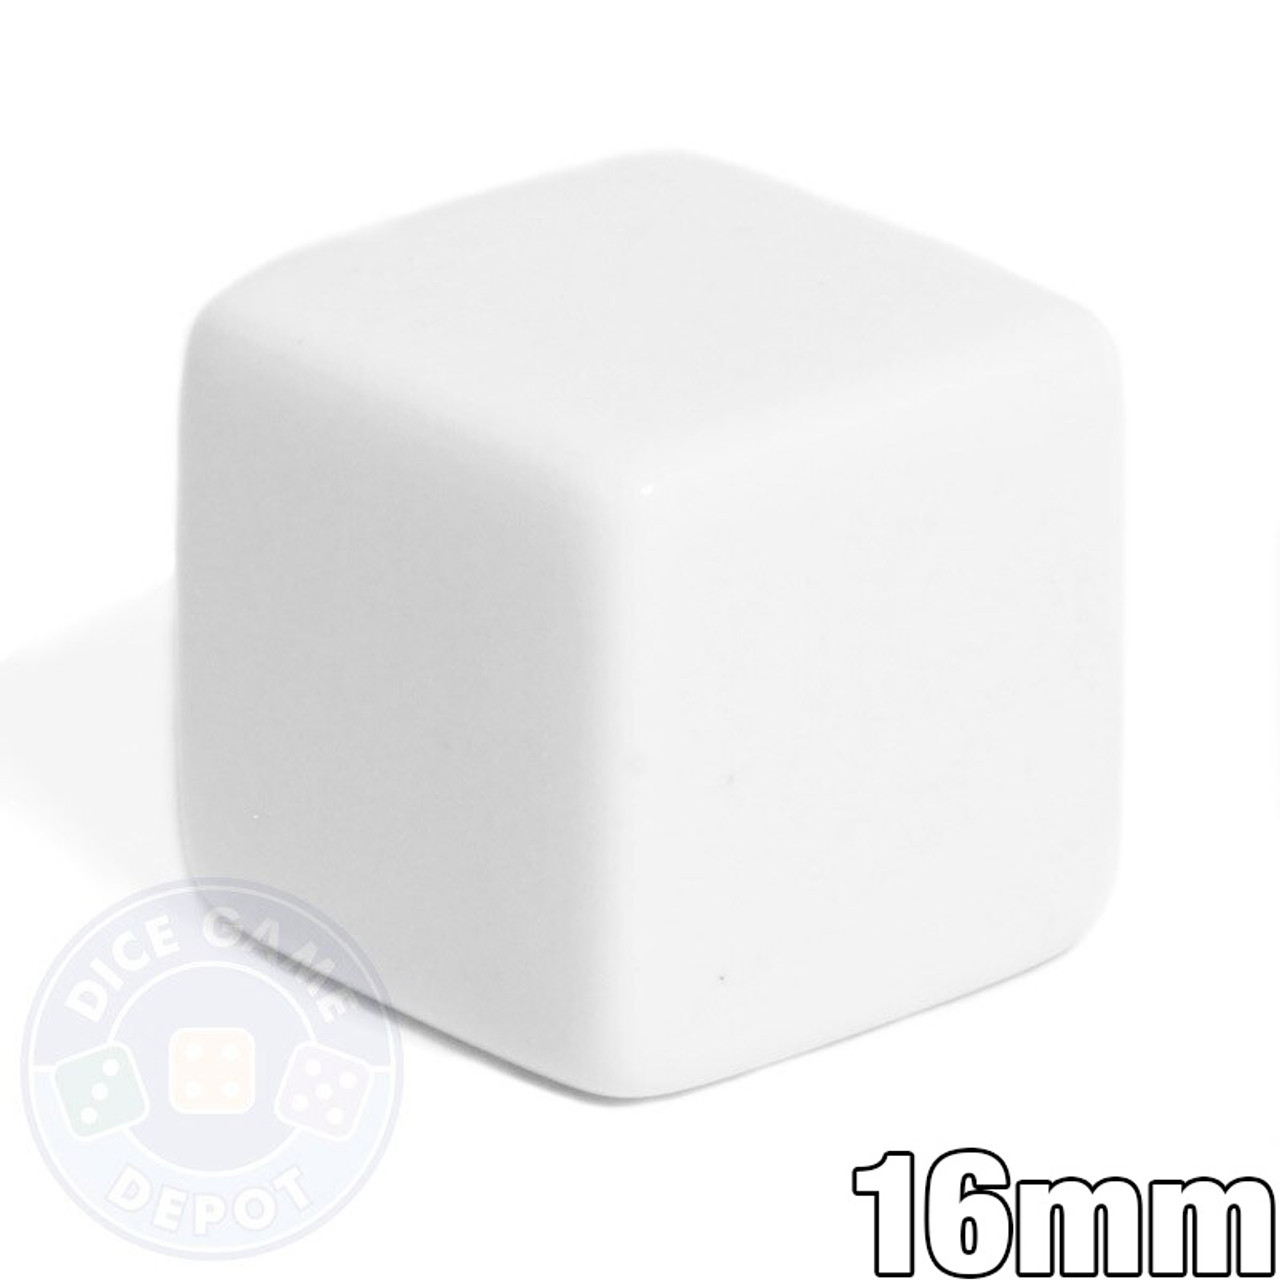 50pcs Blank White Dice 14mm Square D6 Die Cubes for Board Games DIY Sticker